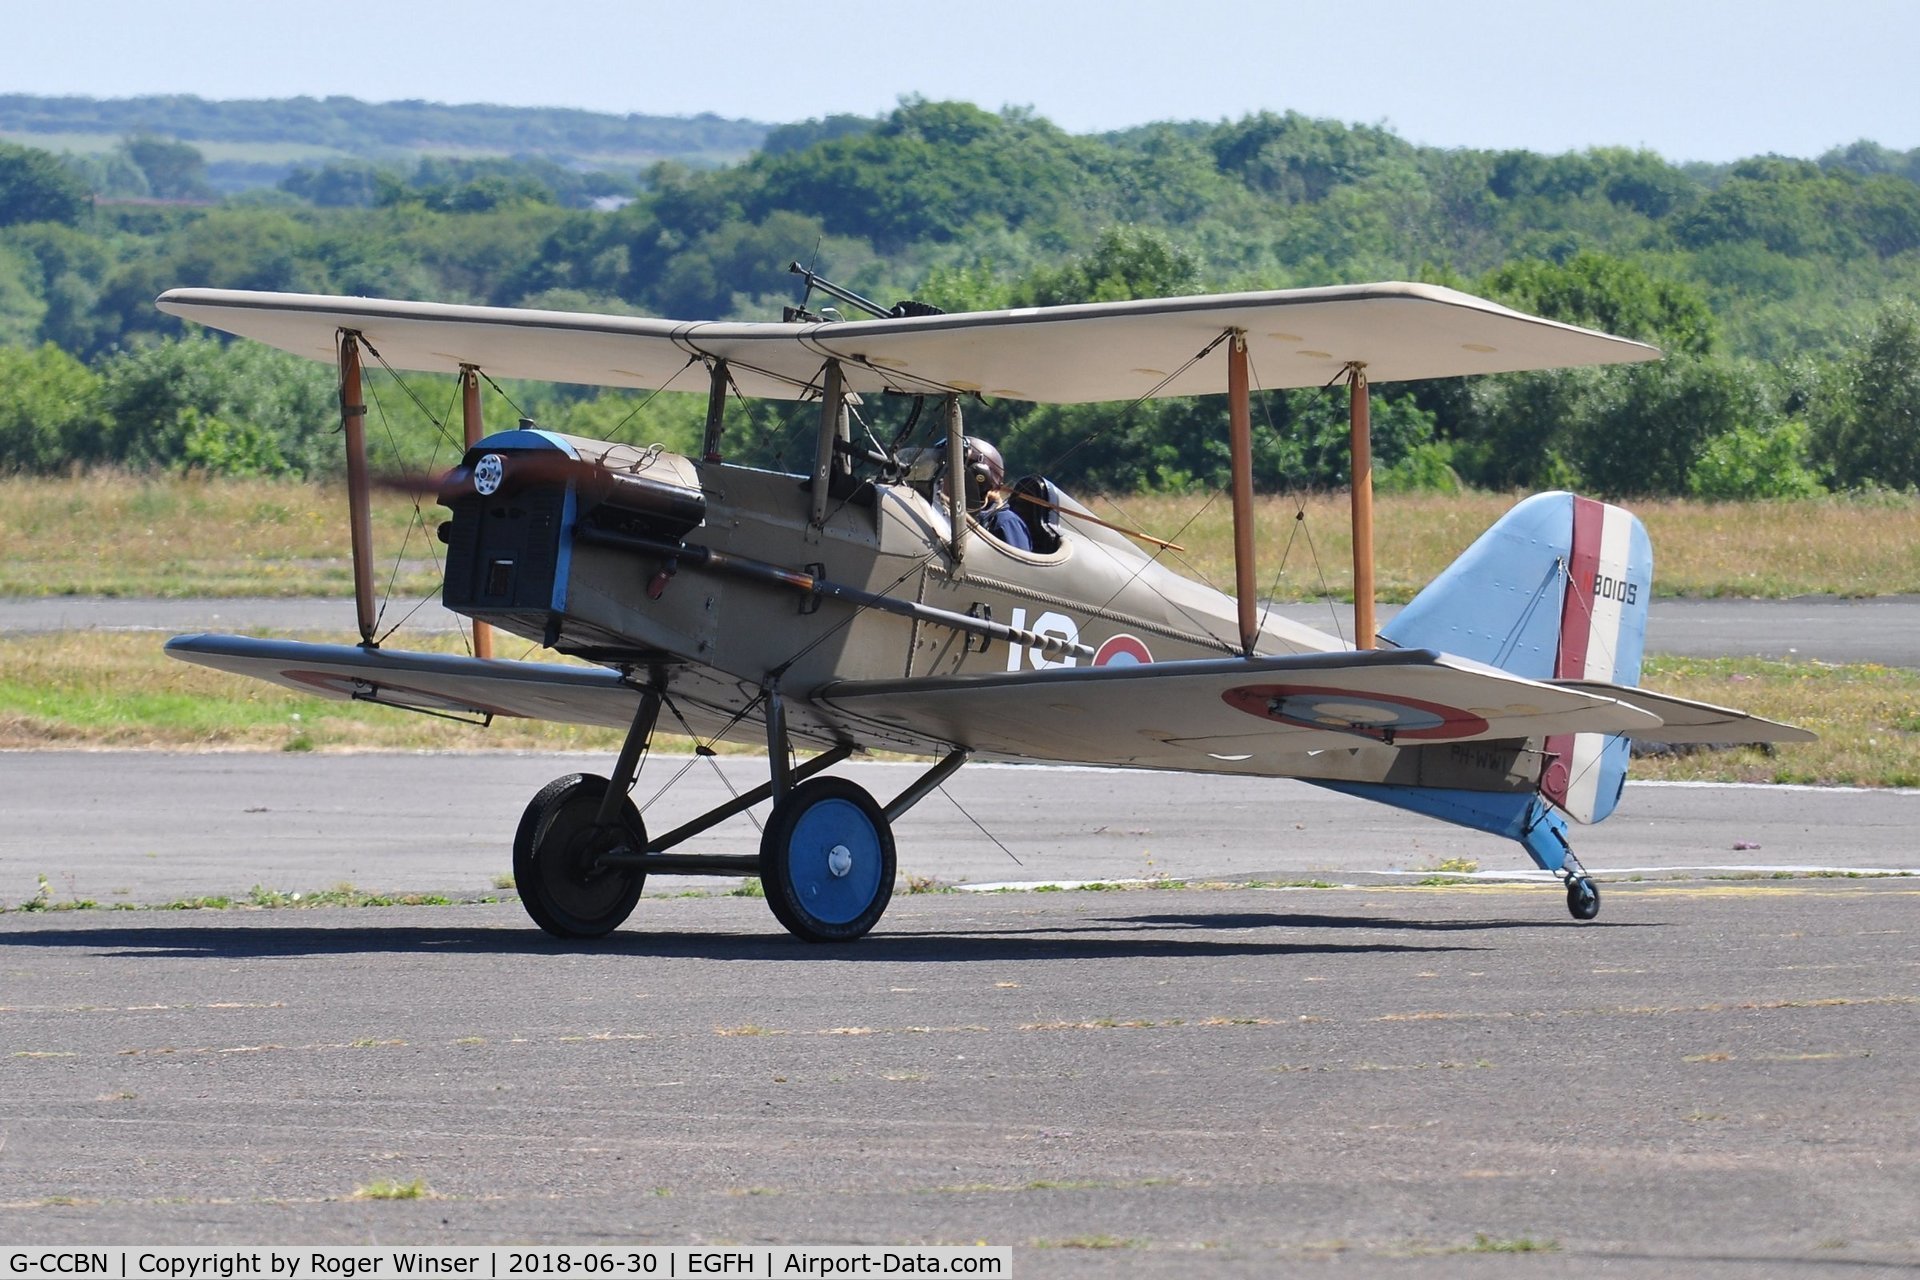 G-CCBN, 1982 Royal Aircraft Factory SE-5A Replica C/N 077246, SE-5A replica in US Army Air Service colour scheme and marked 80105/19.